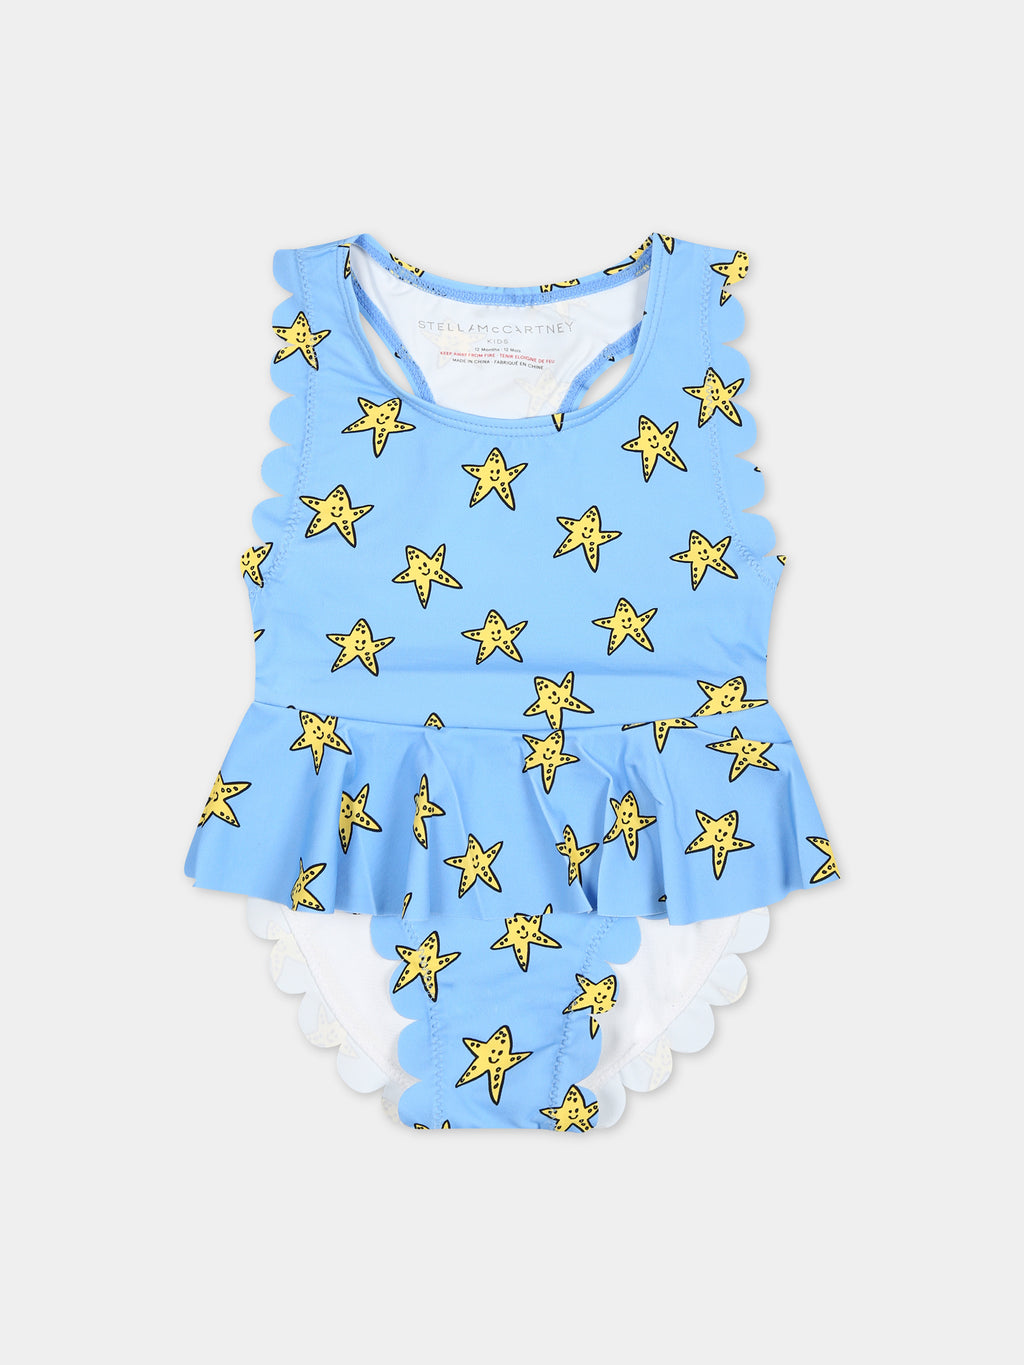 Light blue swimsuit for baby girl with starfishes